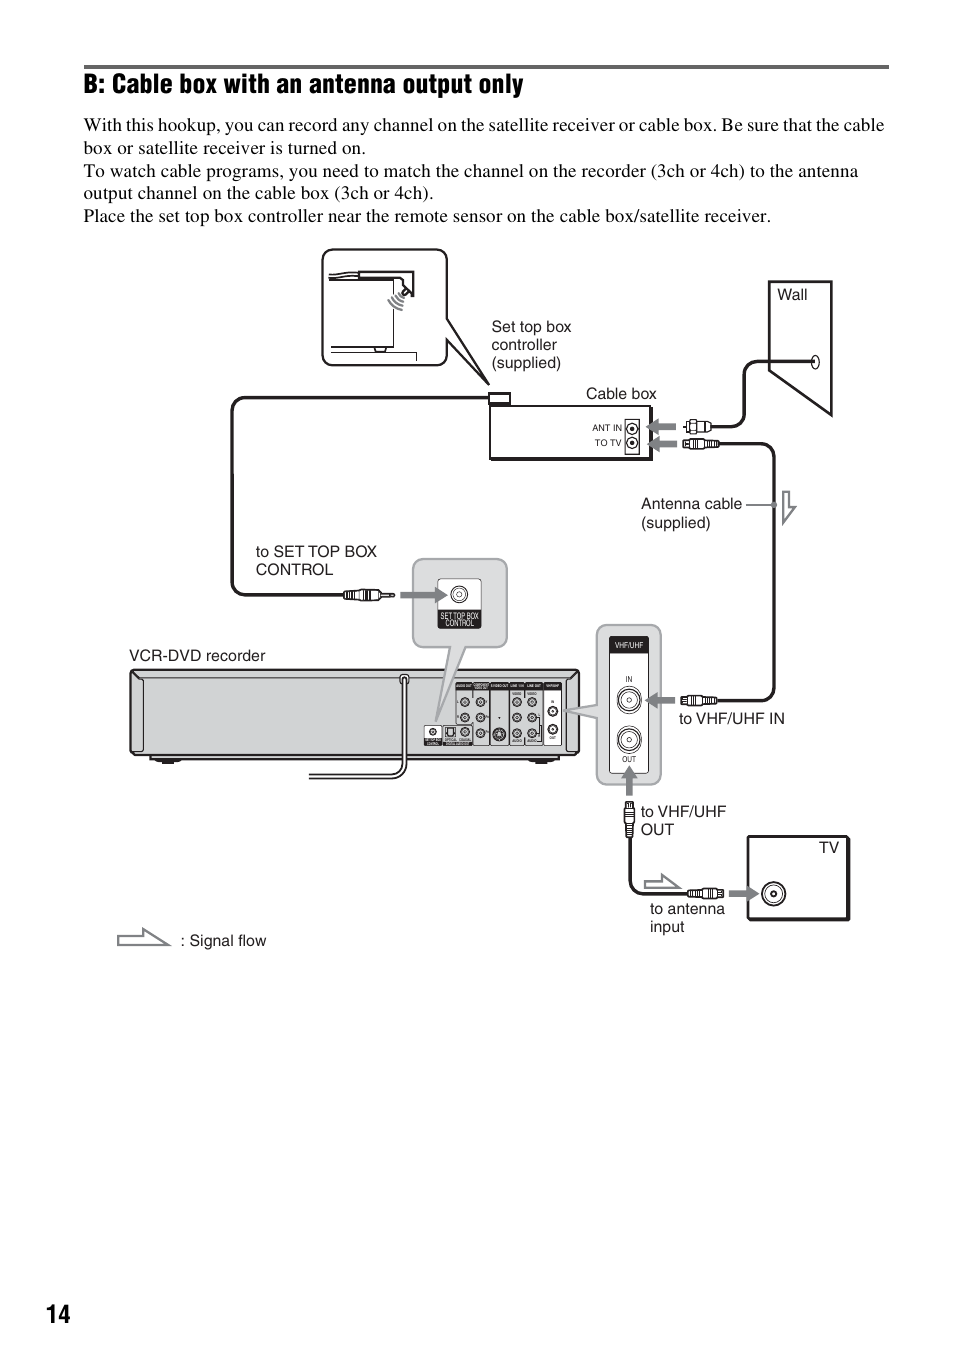 B: cable box with an antenna output only | Sony RDR-VX521 User Manual | Page 14 / 132